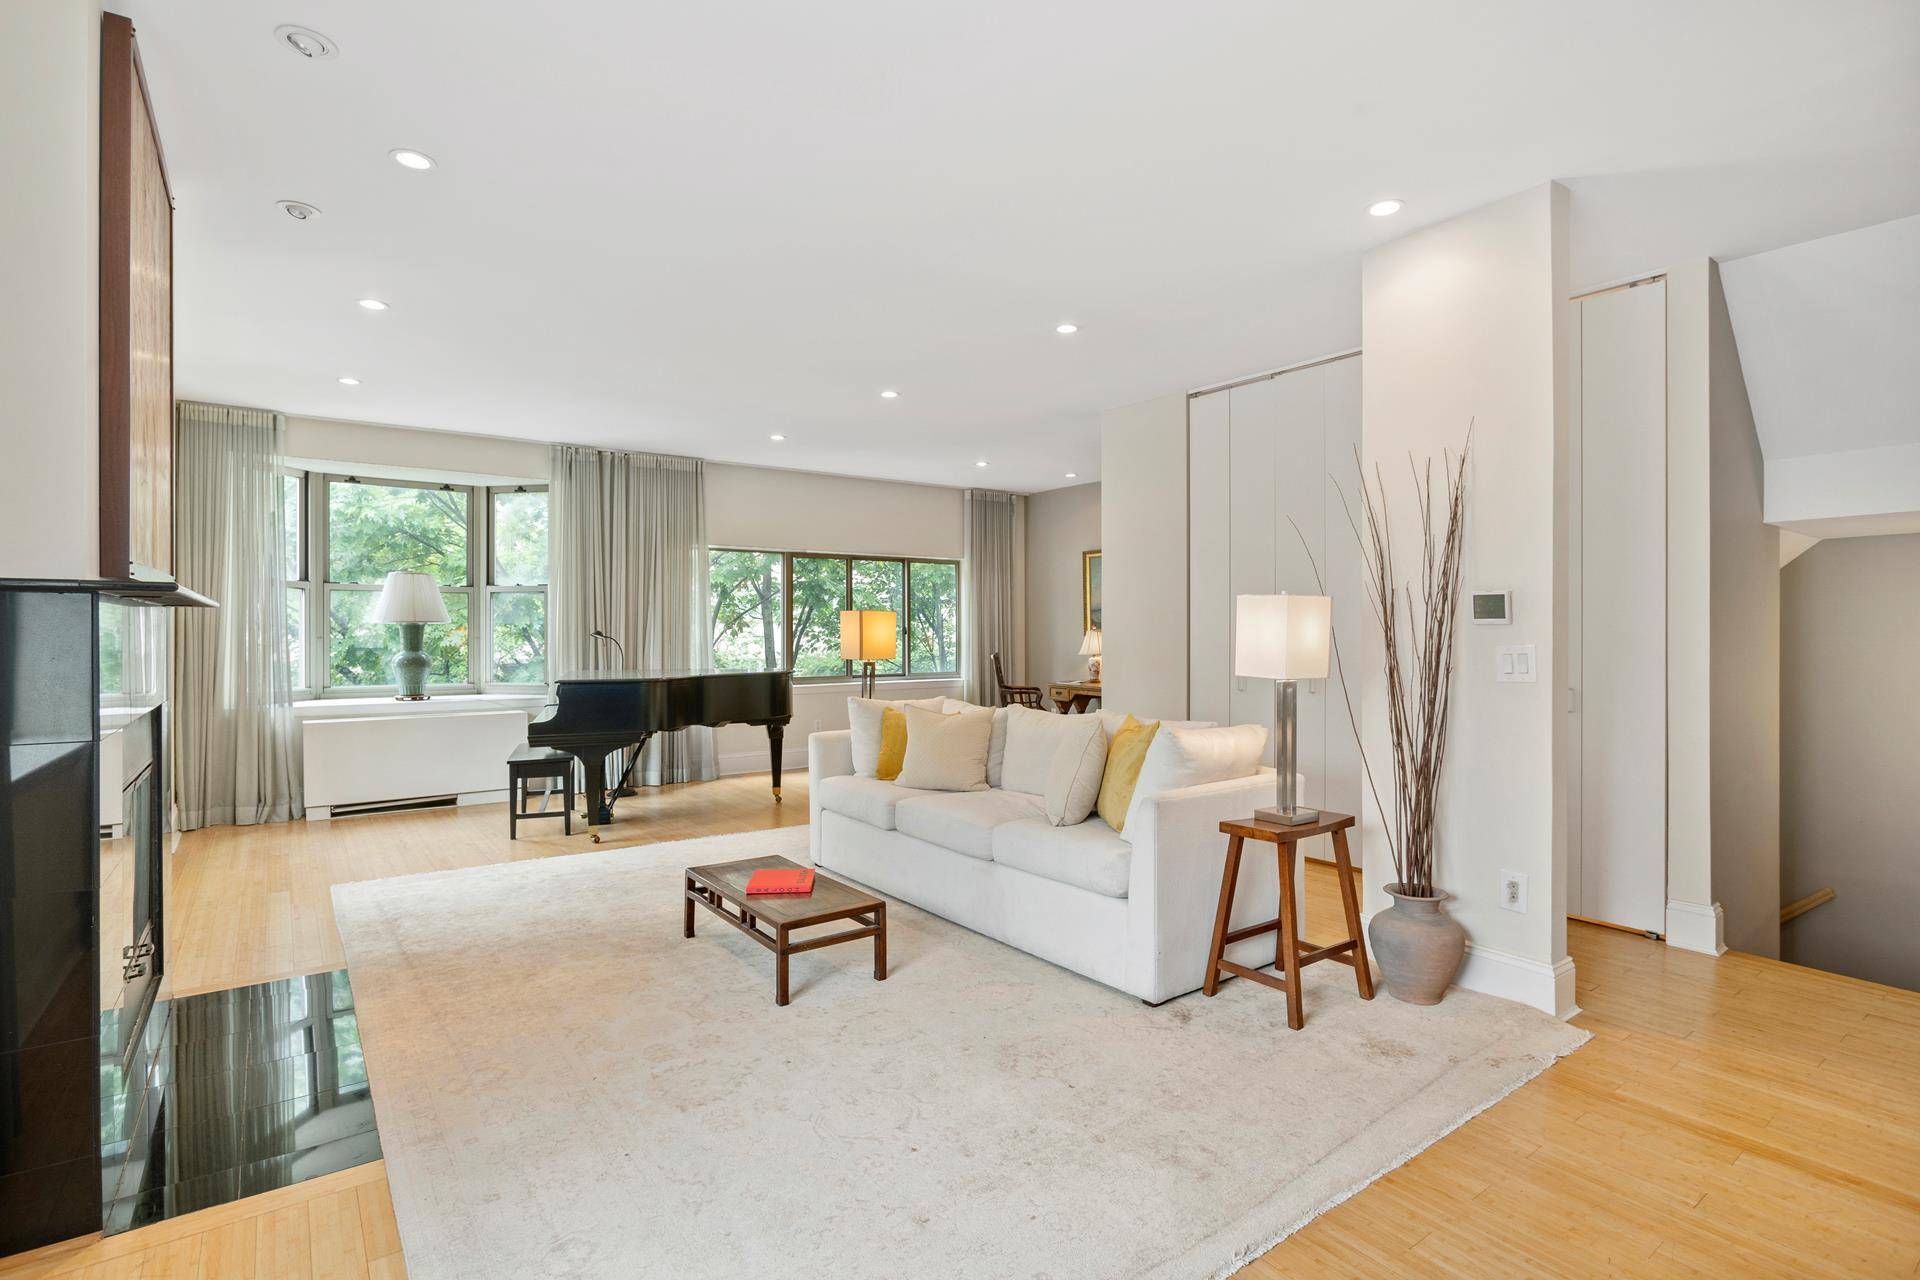 Stunning Townhouse Condo at 1400 Fifth Avenue A Serene Urban RetreatDiscover the perfect blend of urban living and tranquil retreat in this magnificent four bedroom, 3.